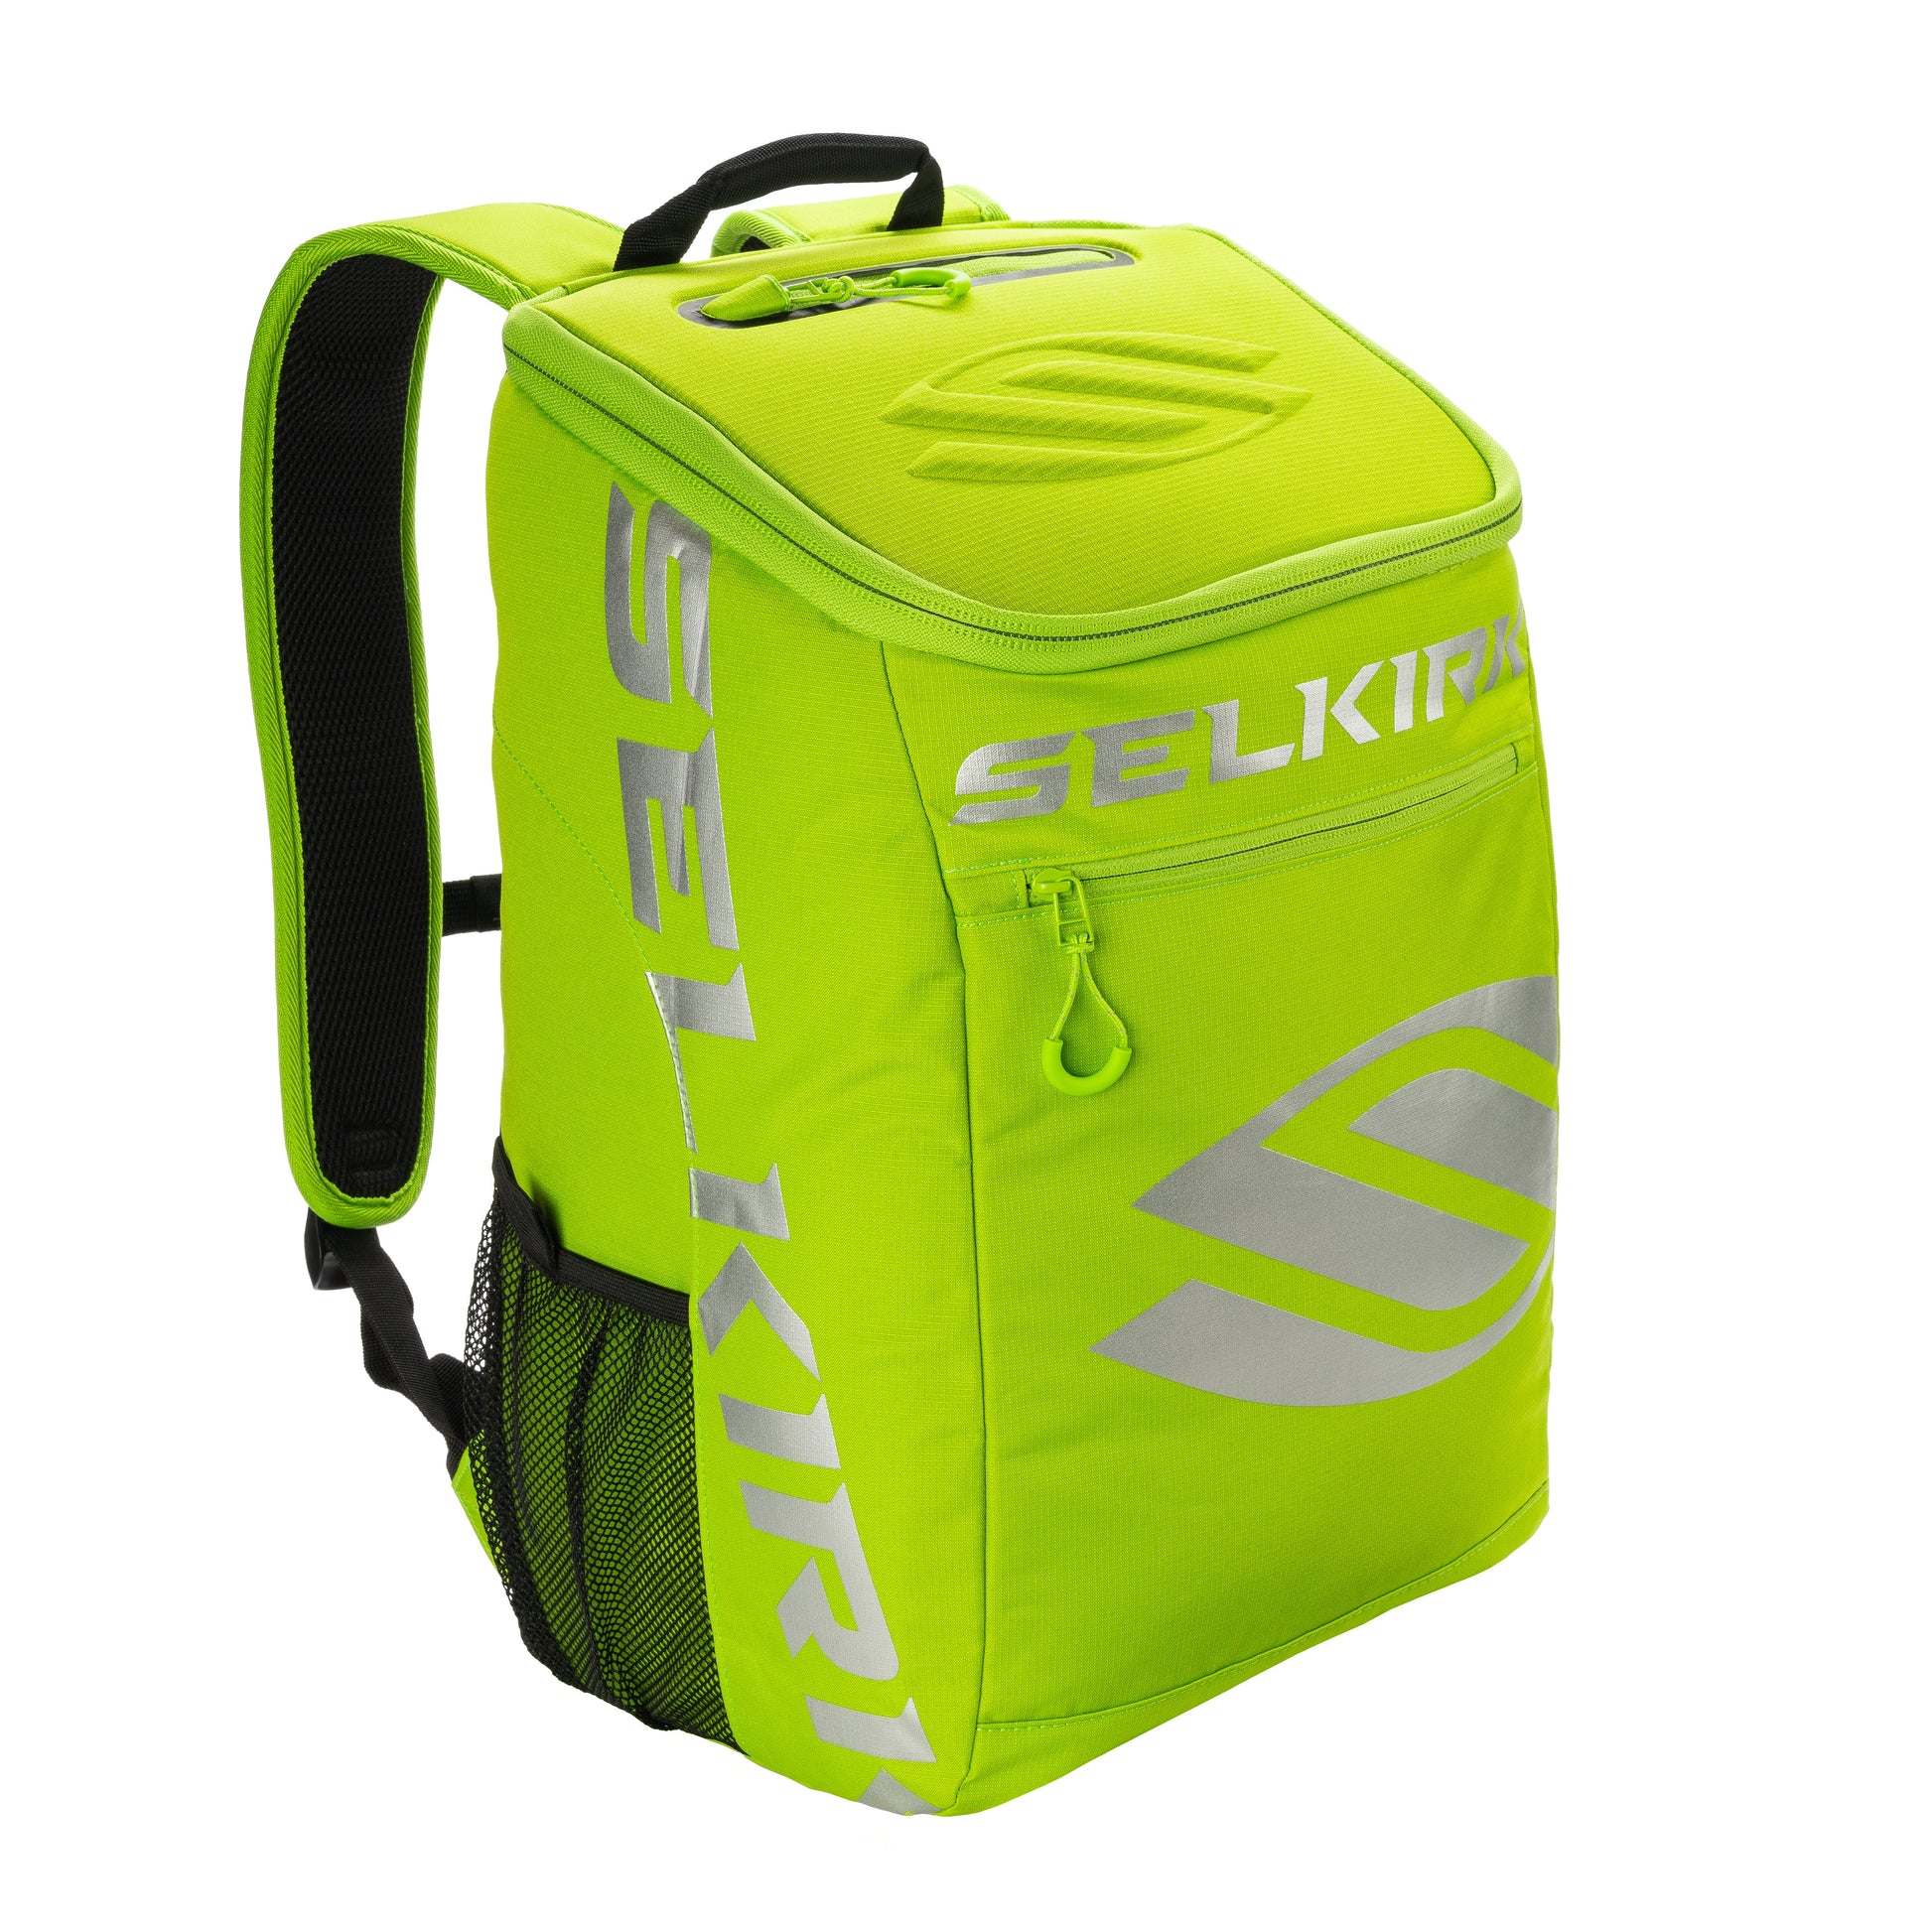 A Selkirk Core Series Team Backpack Pickleball Bag with the Selkirk logo on it.